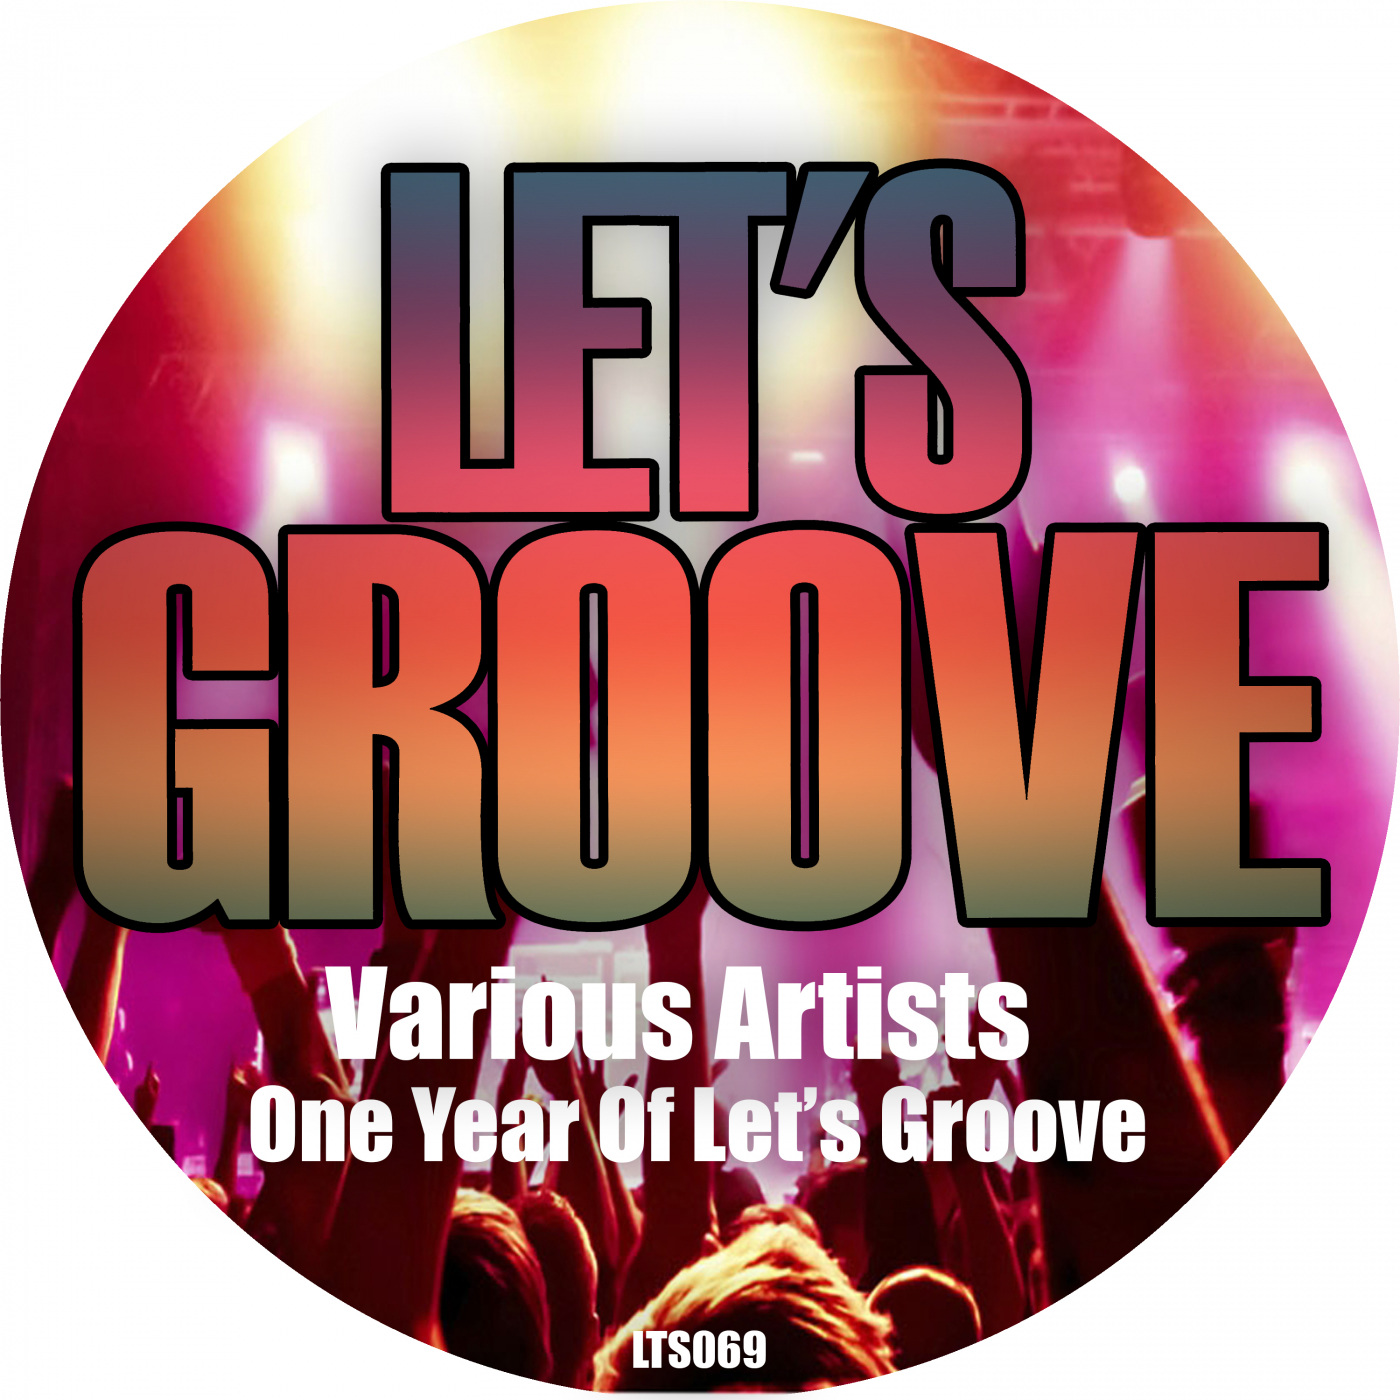 VA - One Year Of Let's Groove / Let's Groove